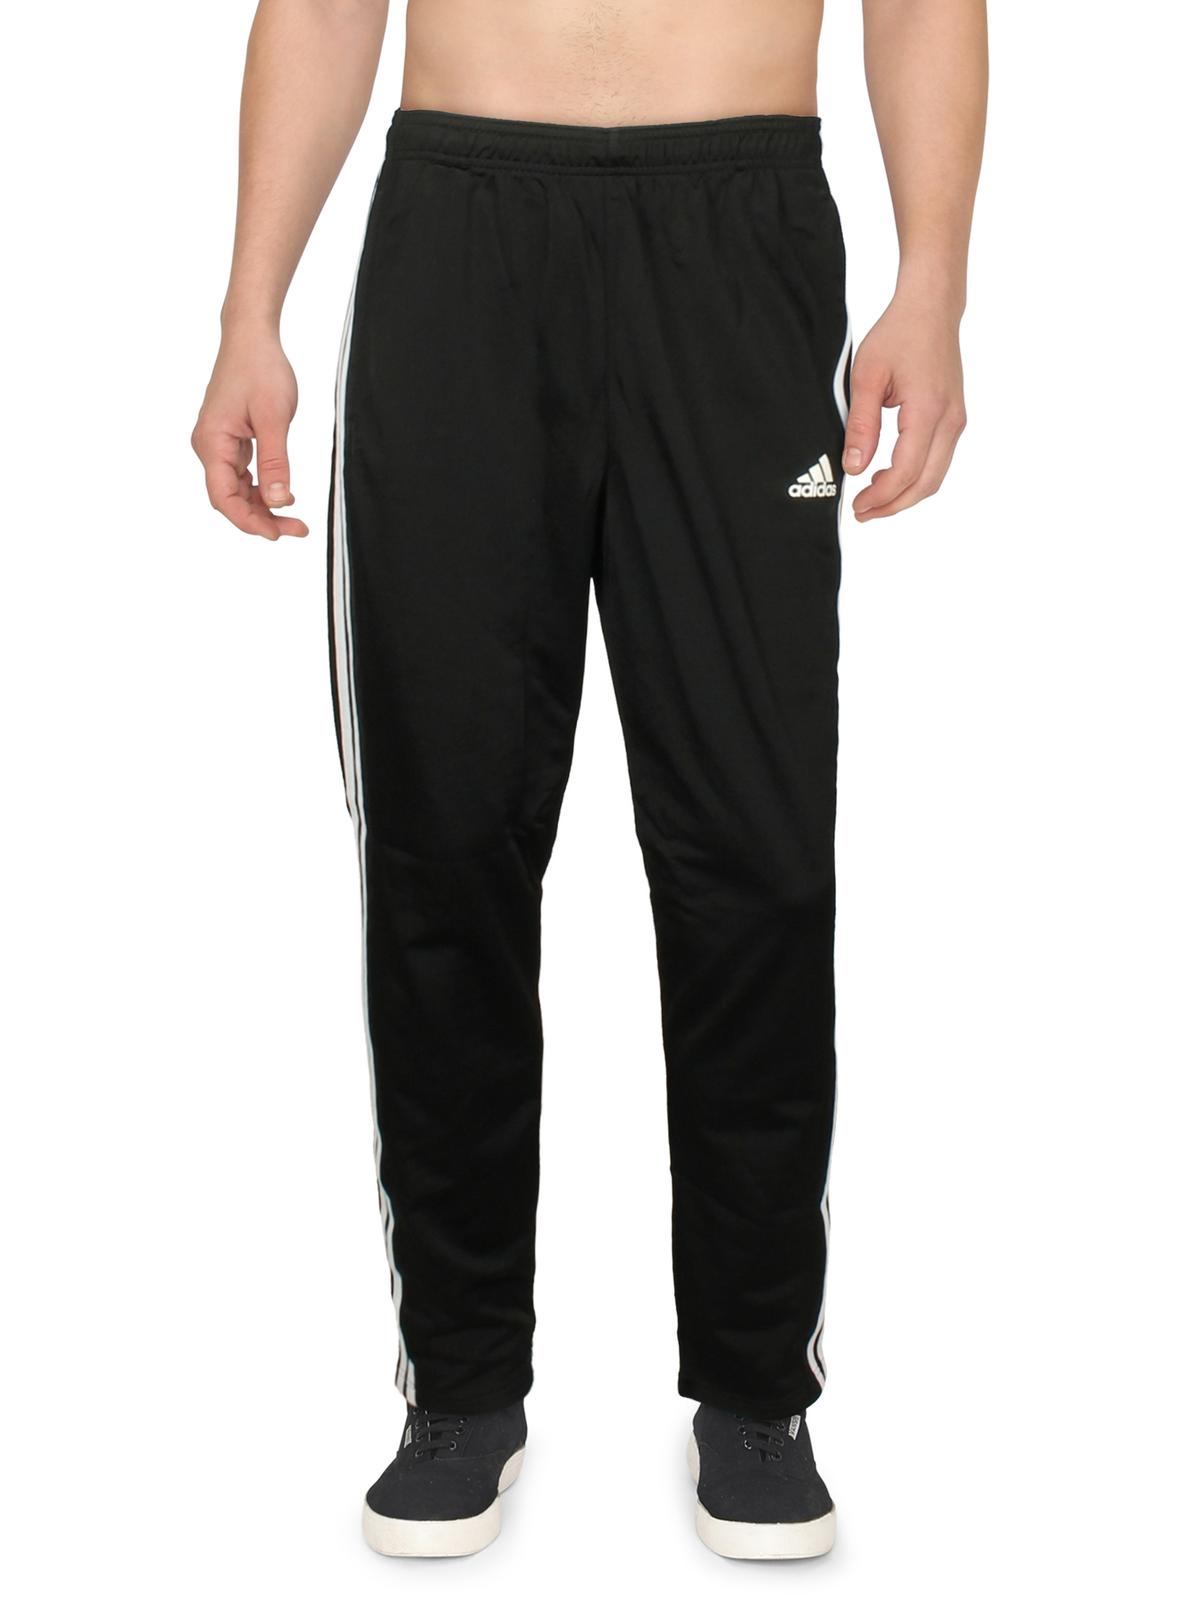 Adidas Mens   Tricot Tapered Track Pants - image 1 of 8